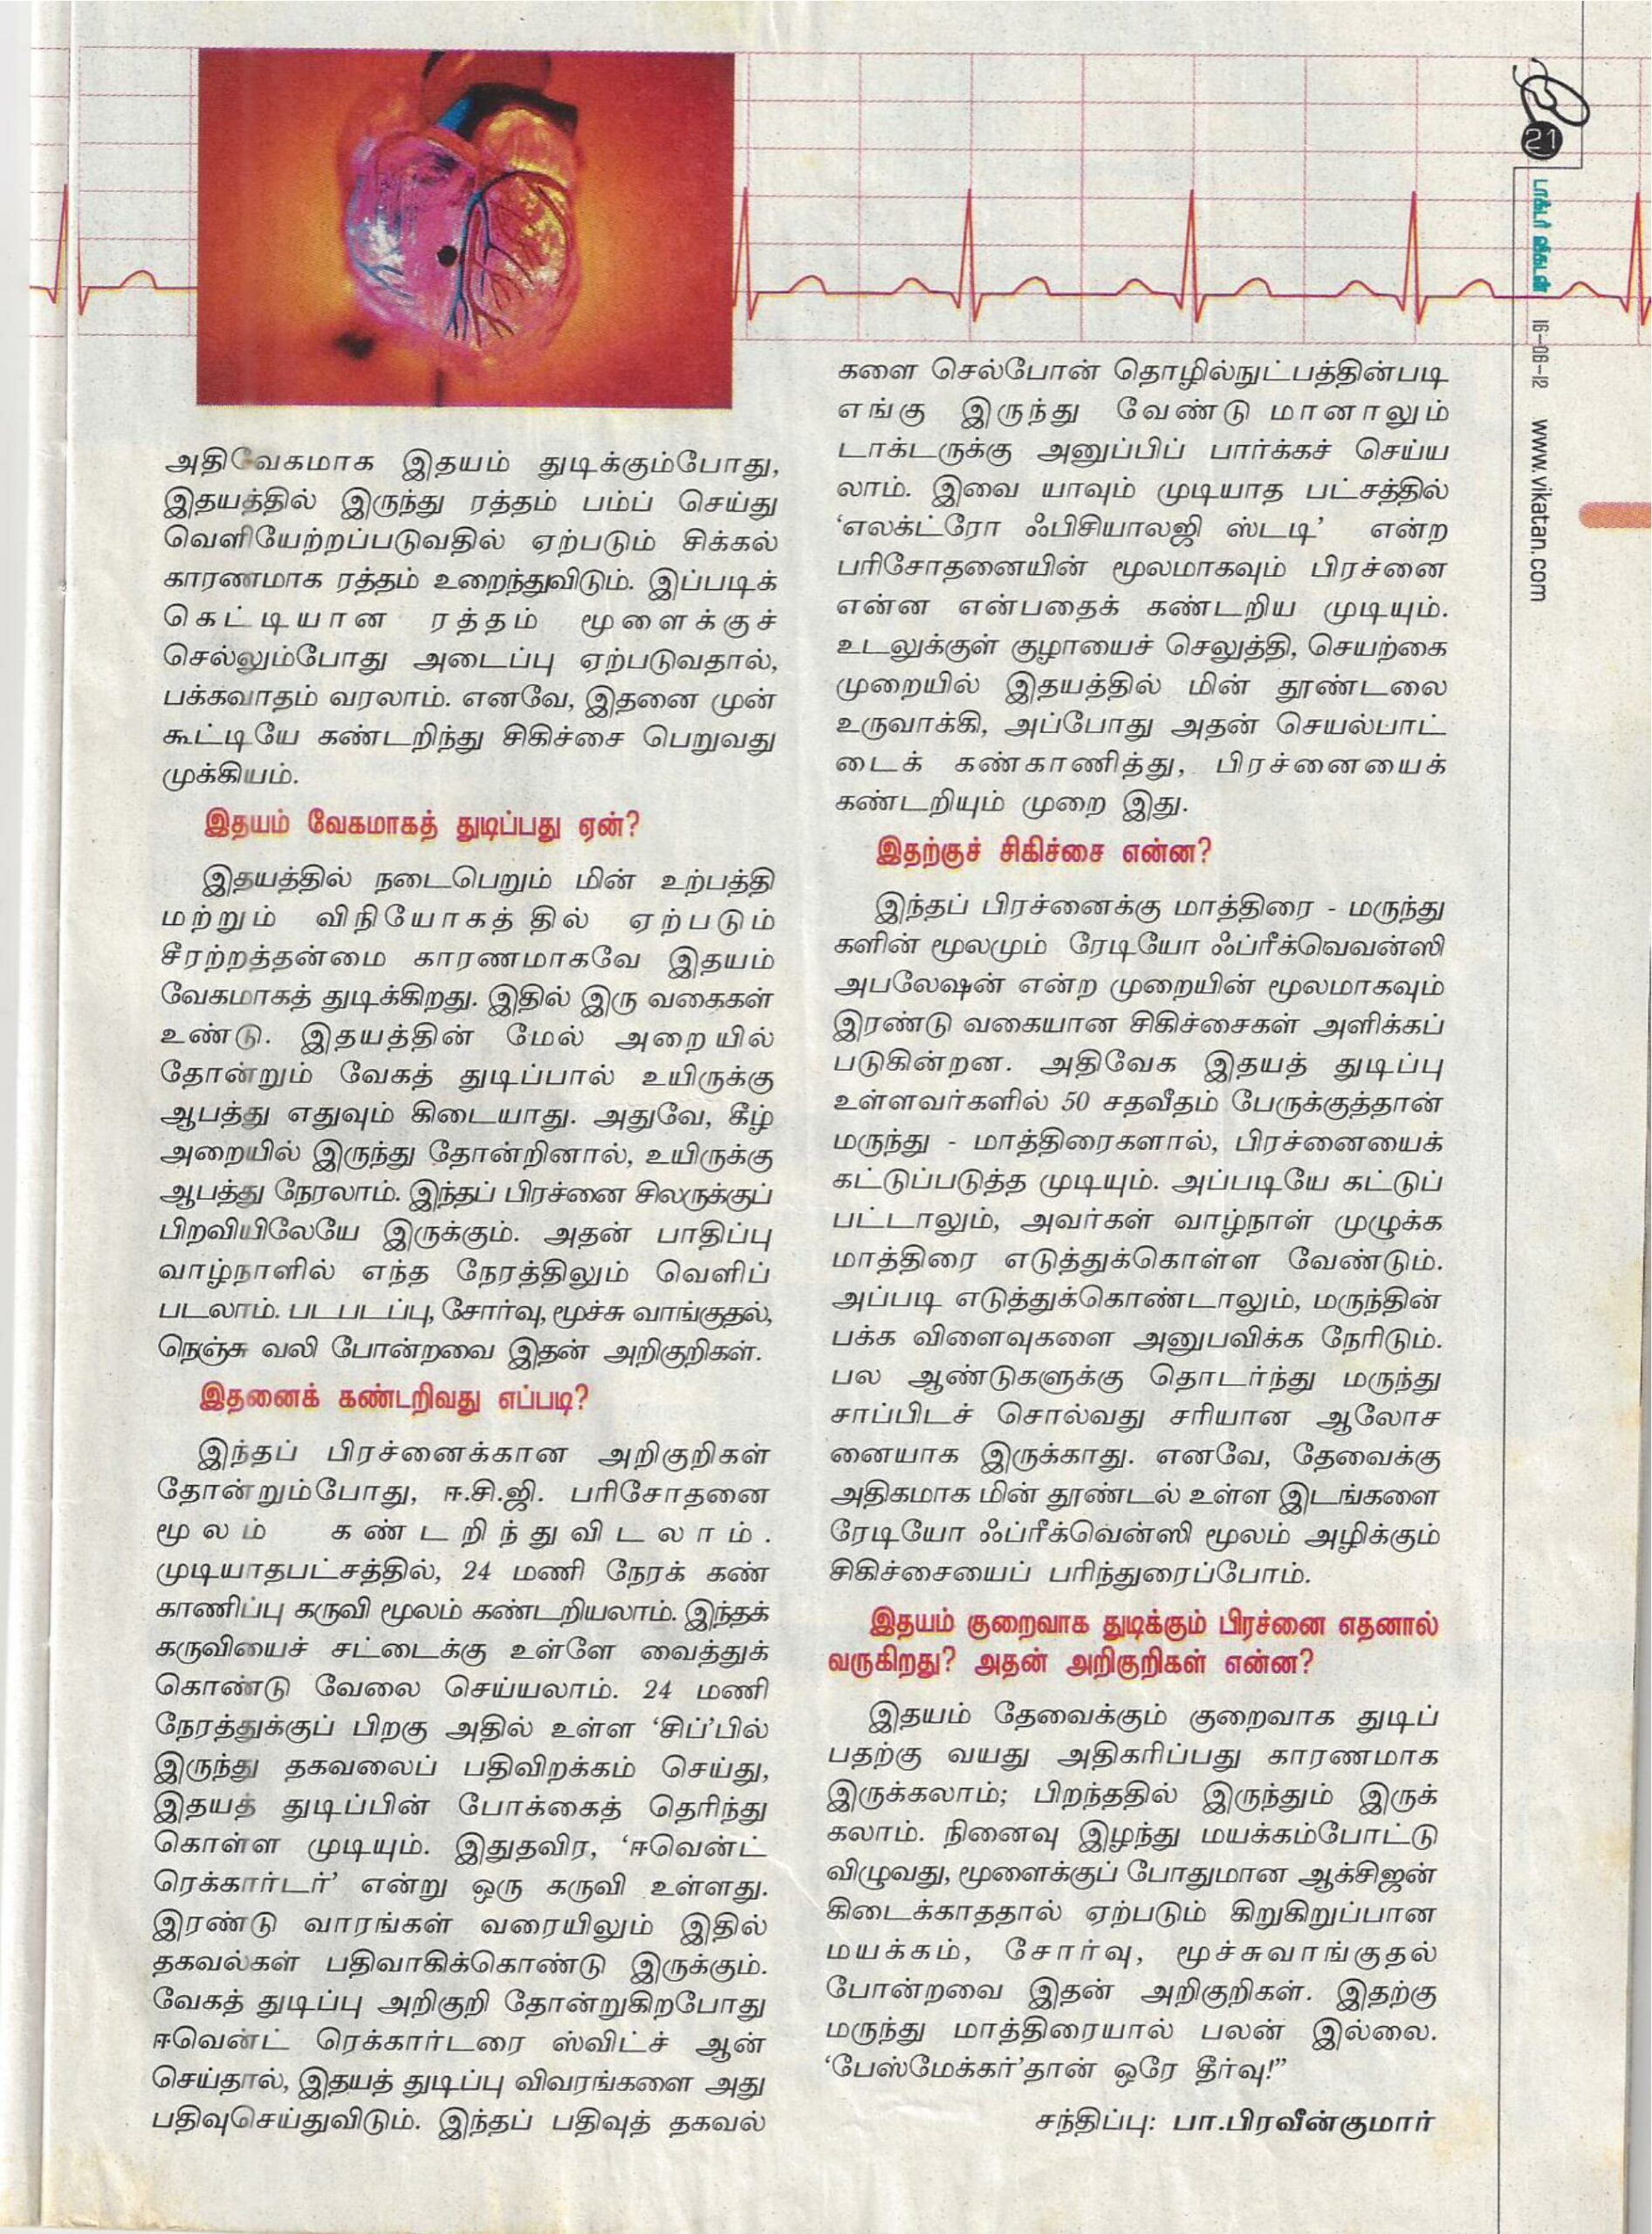 Image of a news article about the heartbeat and rate by Dr. Karthigesan A.M.